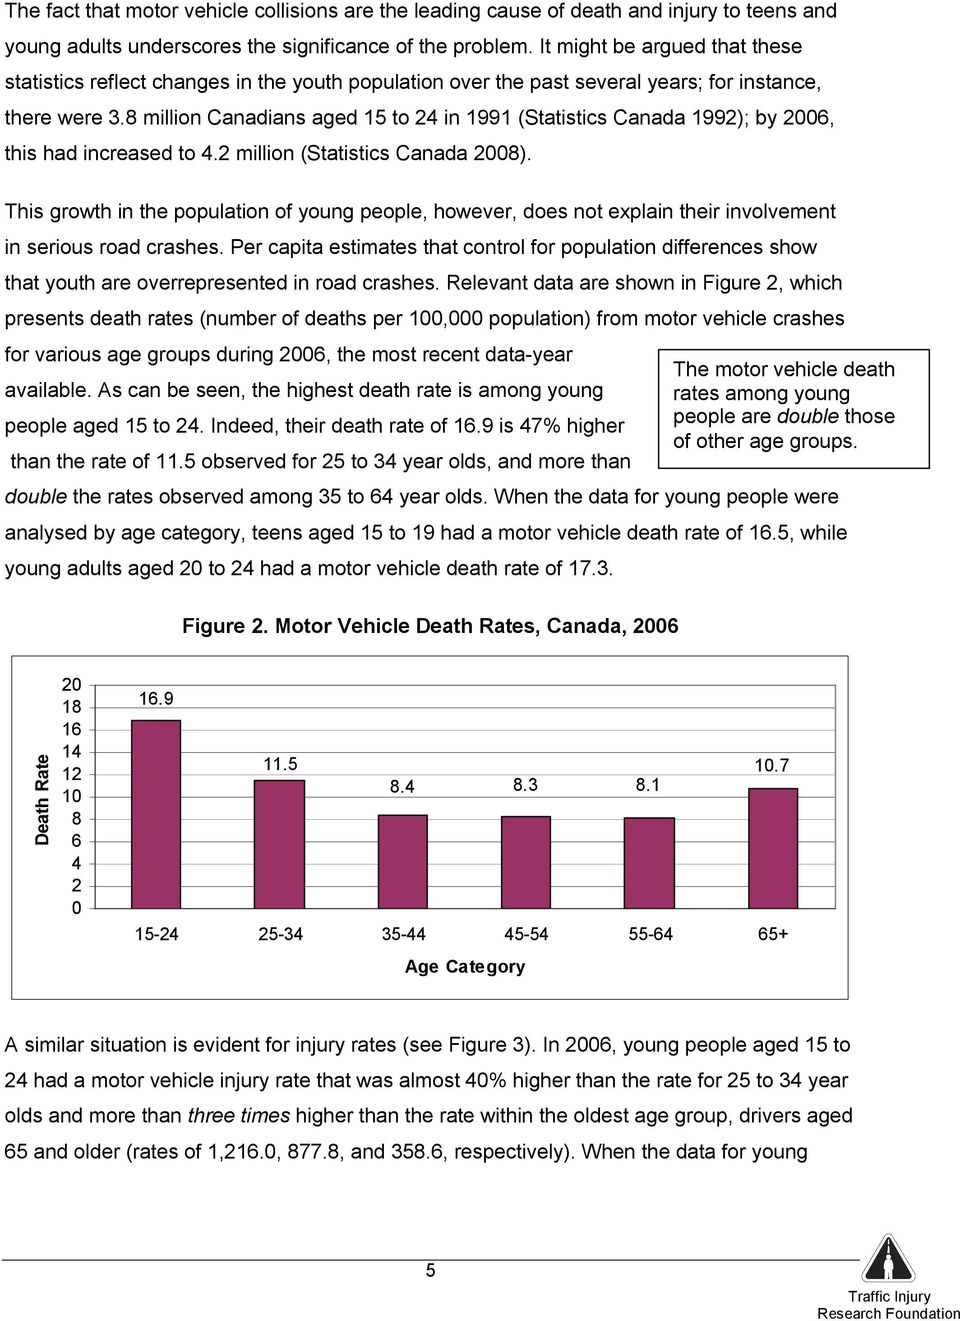 8 million Canadians aged 15 to 24 in 1991 (Statistics Canada 1992); by 2006, this had increased to 4.2 million (Statistics Canada 2008).